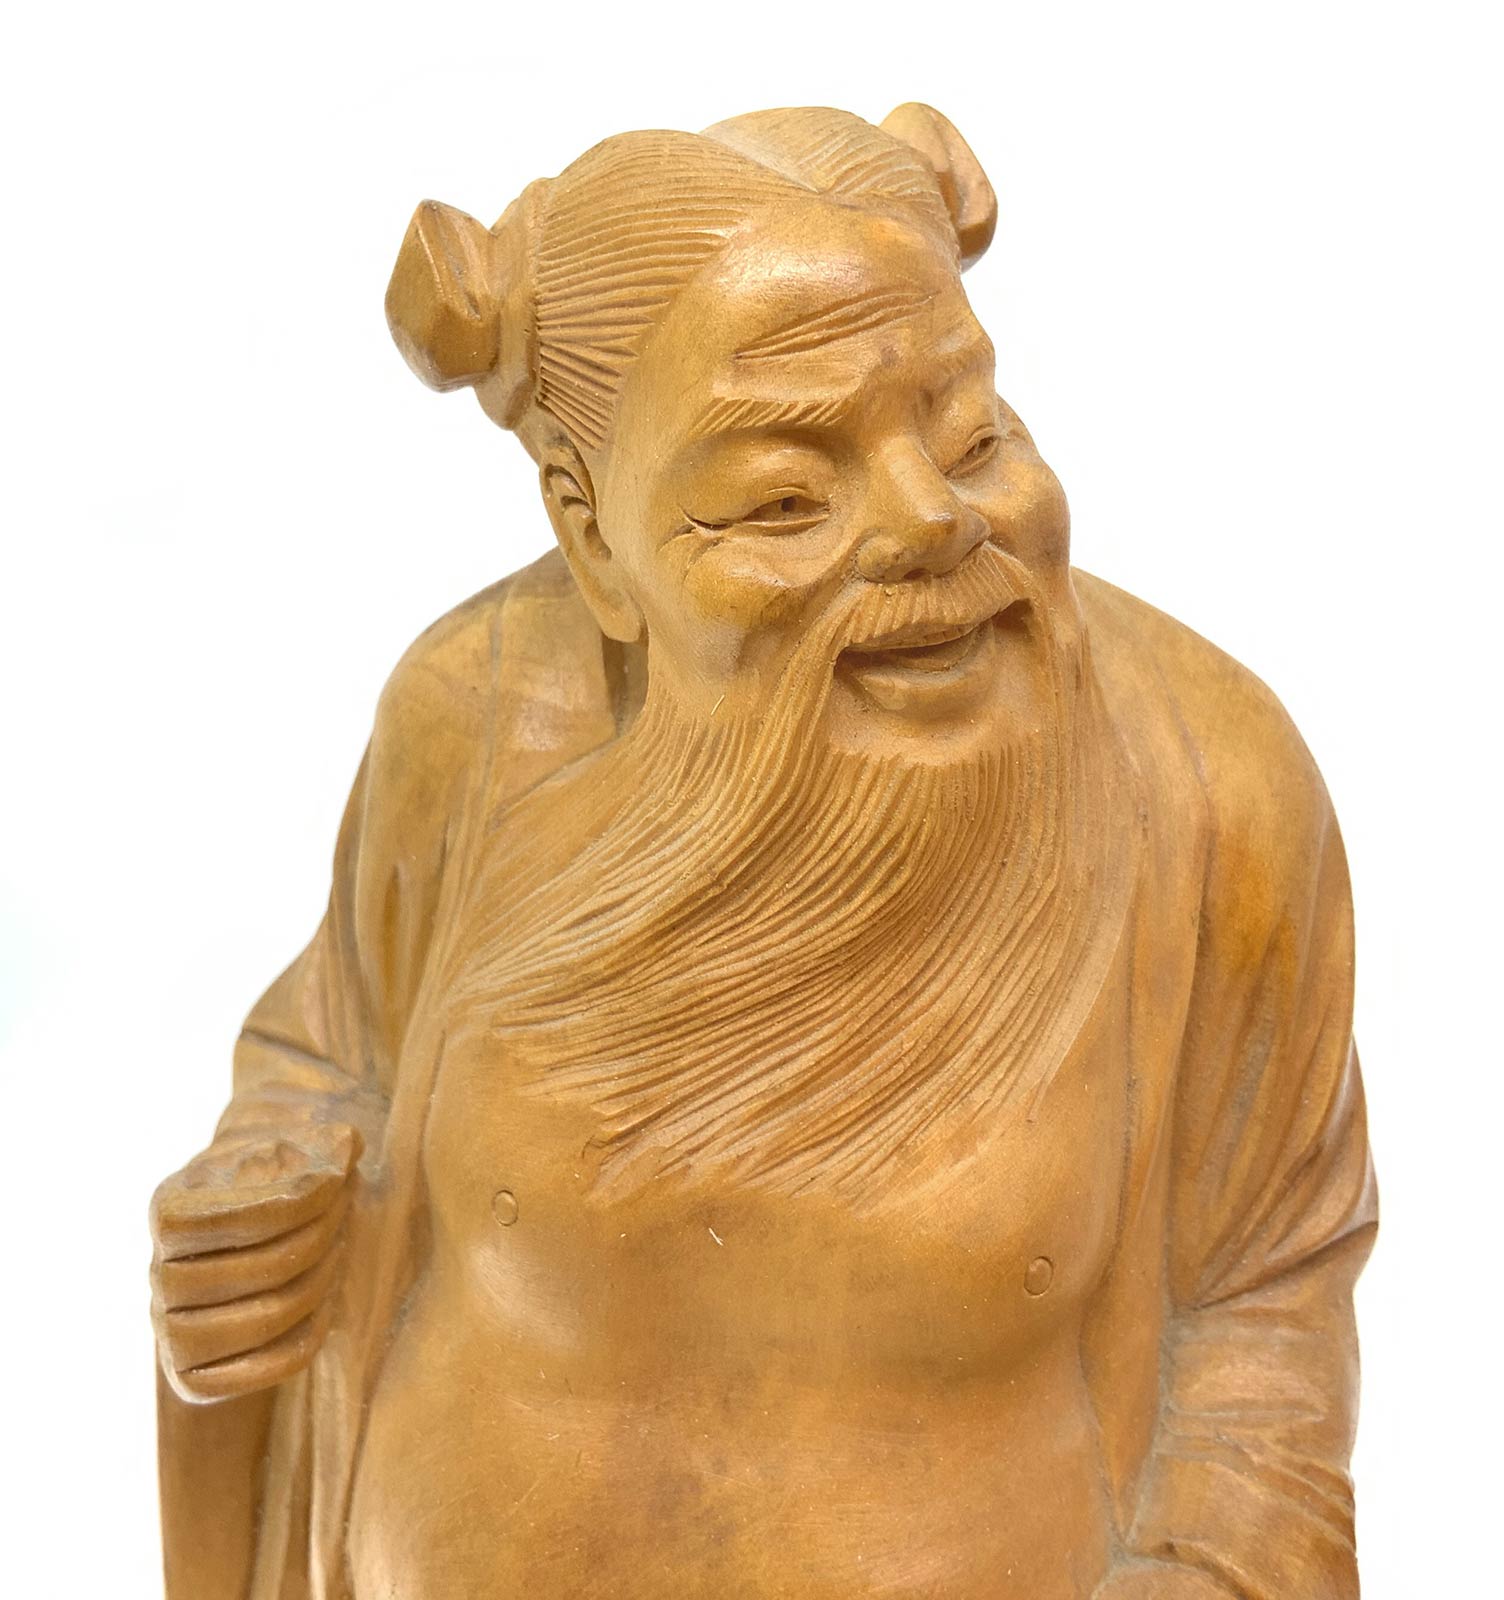 Wooden sculpture of a Chinese wiseman, China, eighteenth century. H 17 cm, 2.4 cm with pedestal. - Image 3 of 5